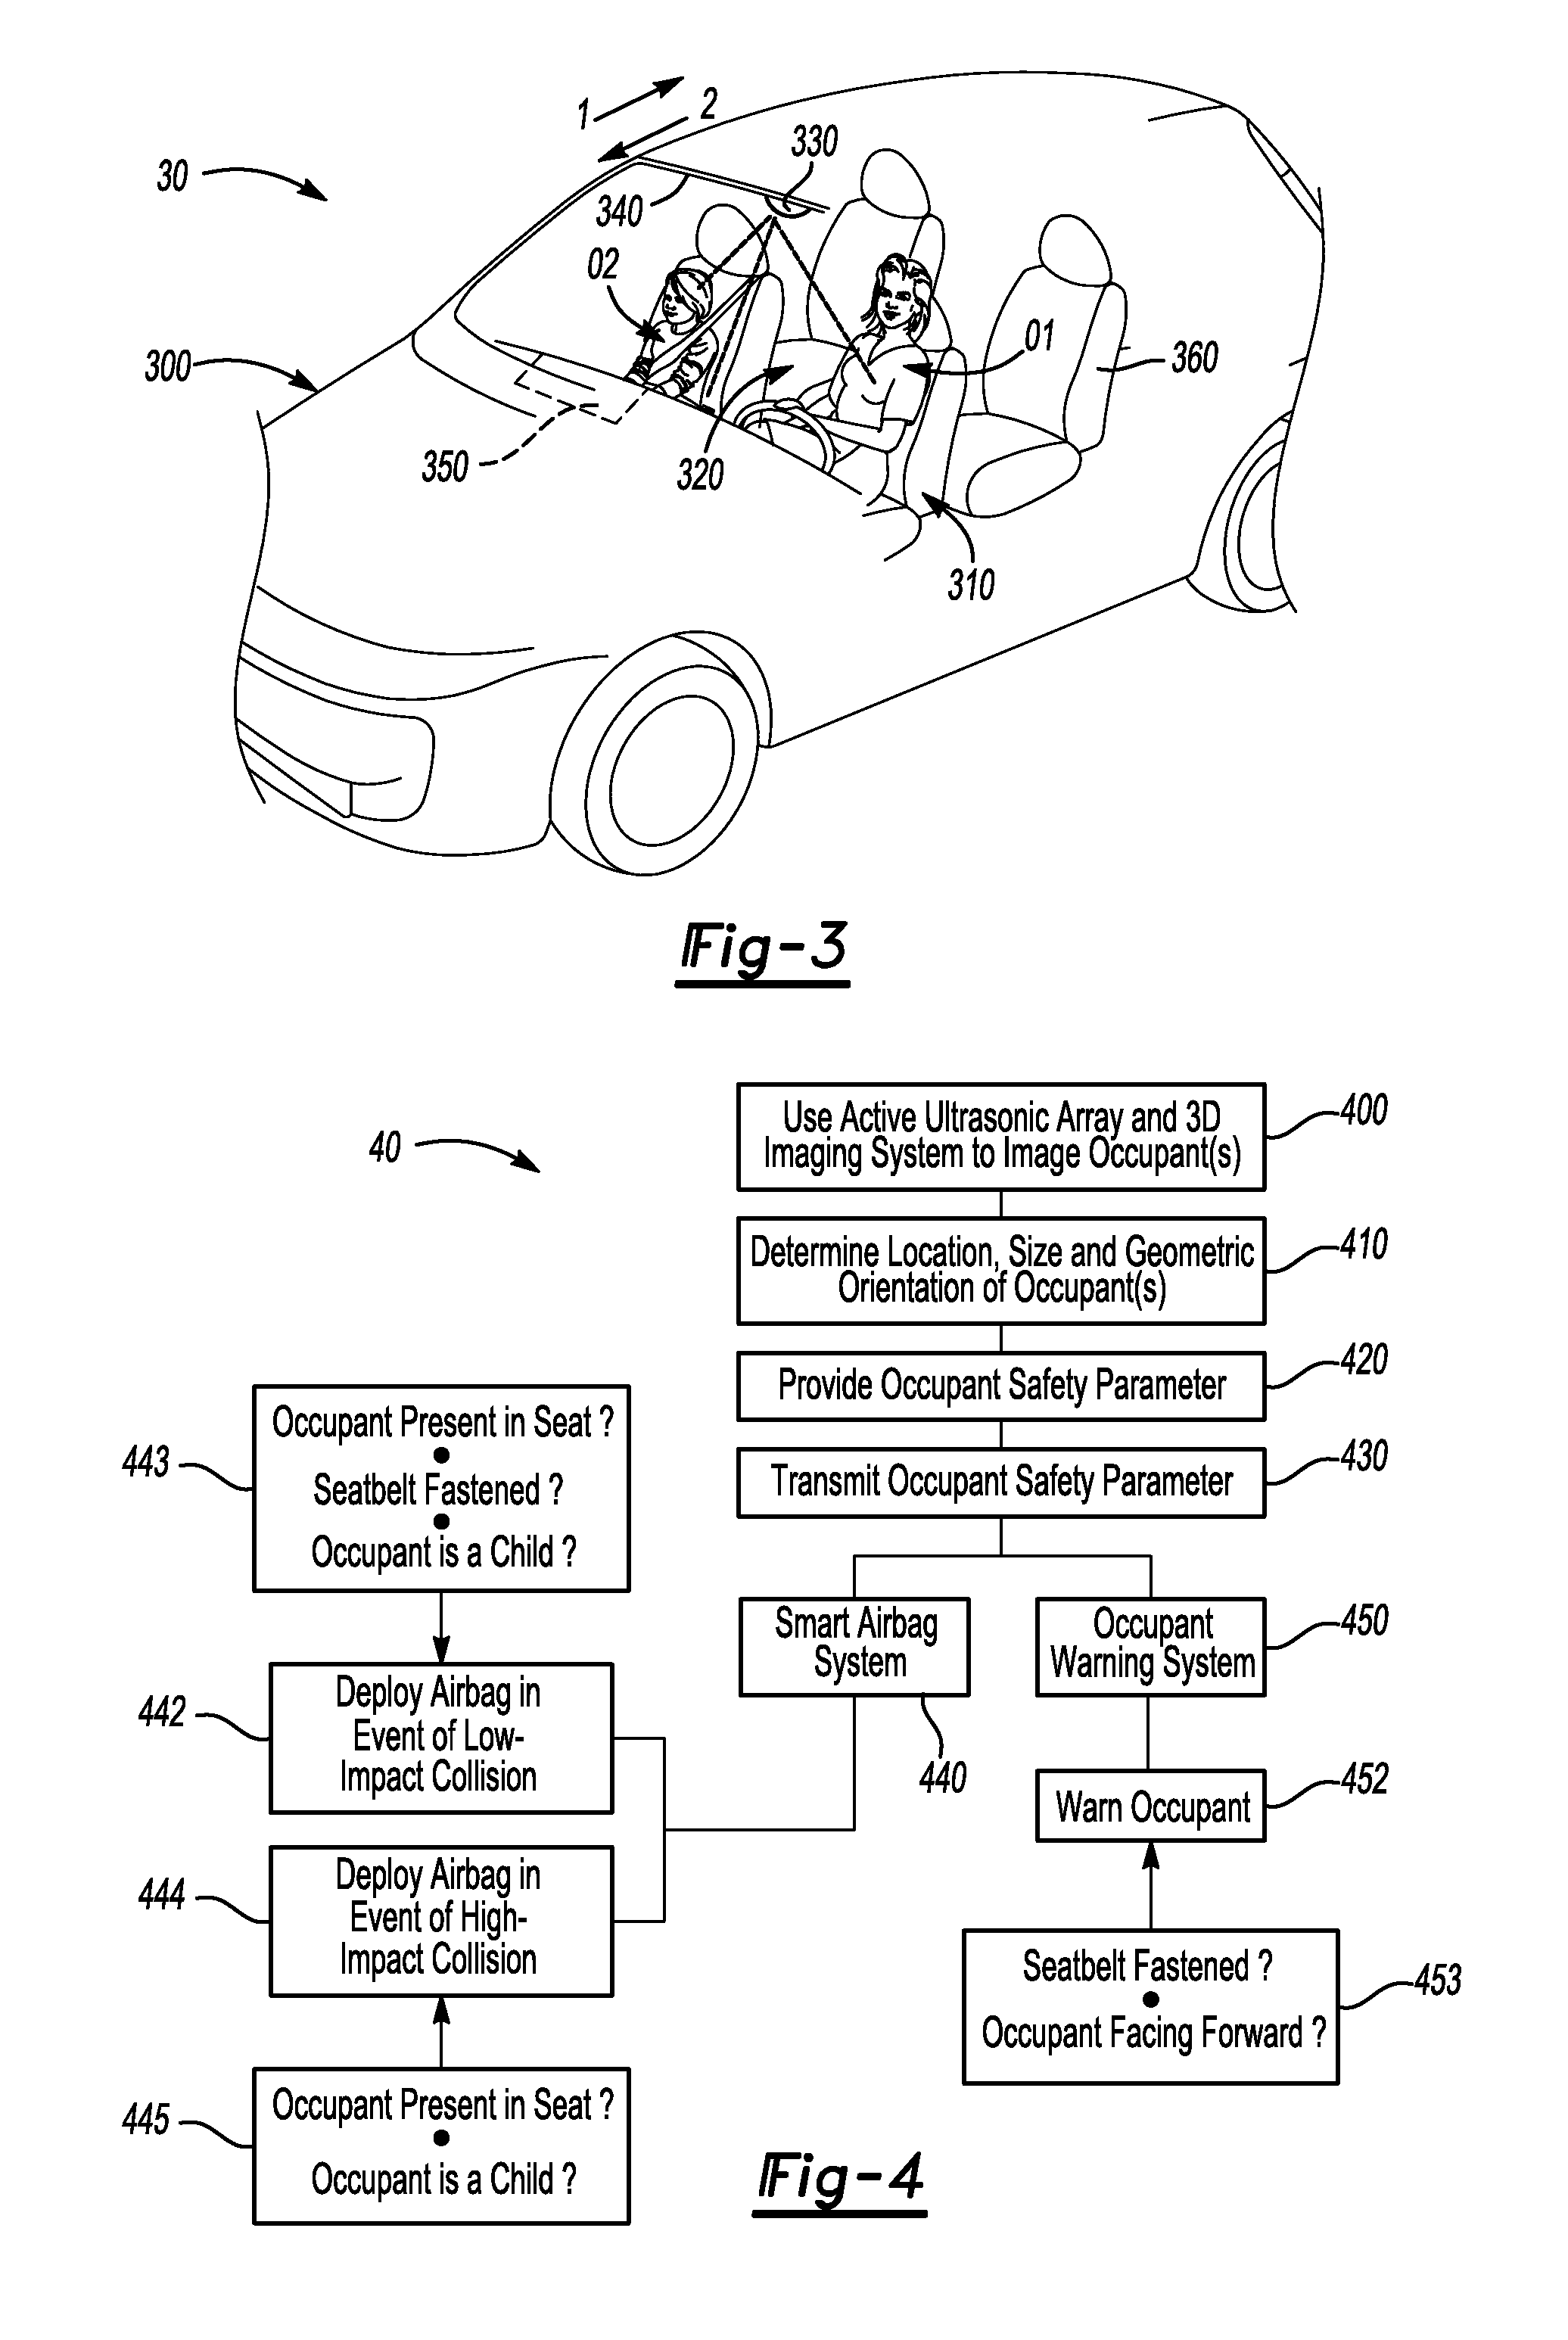 Occupant detection and imaging system